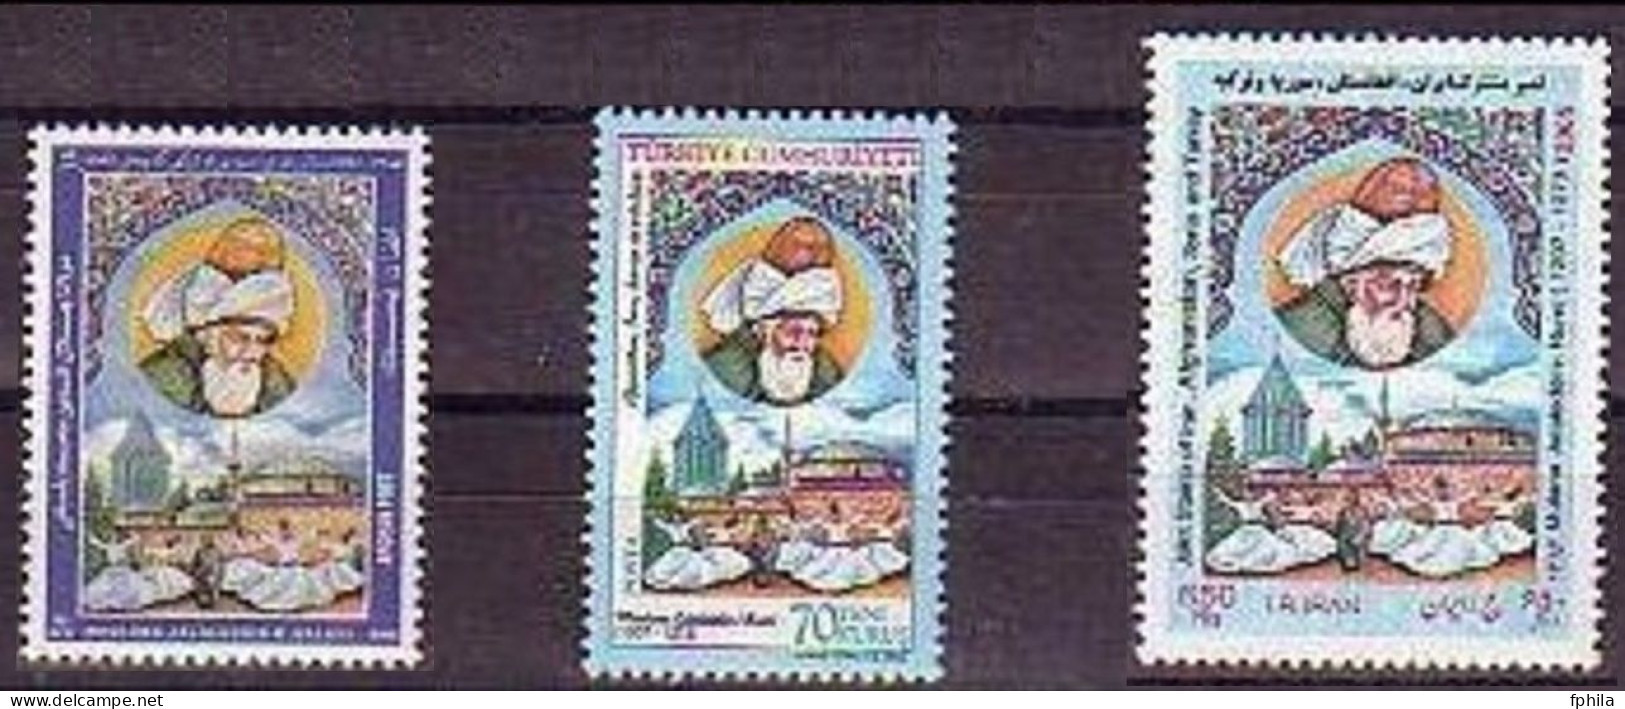 2005 TURKEY CULTURAL ASSETS MEVLANA JOINT ISSUE WITH IRAN AND AFGHANISTAN 3x Sets MNH ** - Emissions Communes